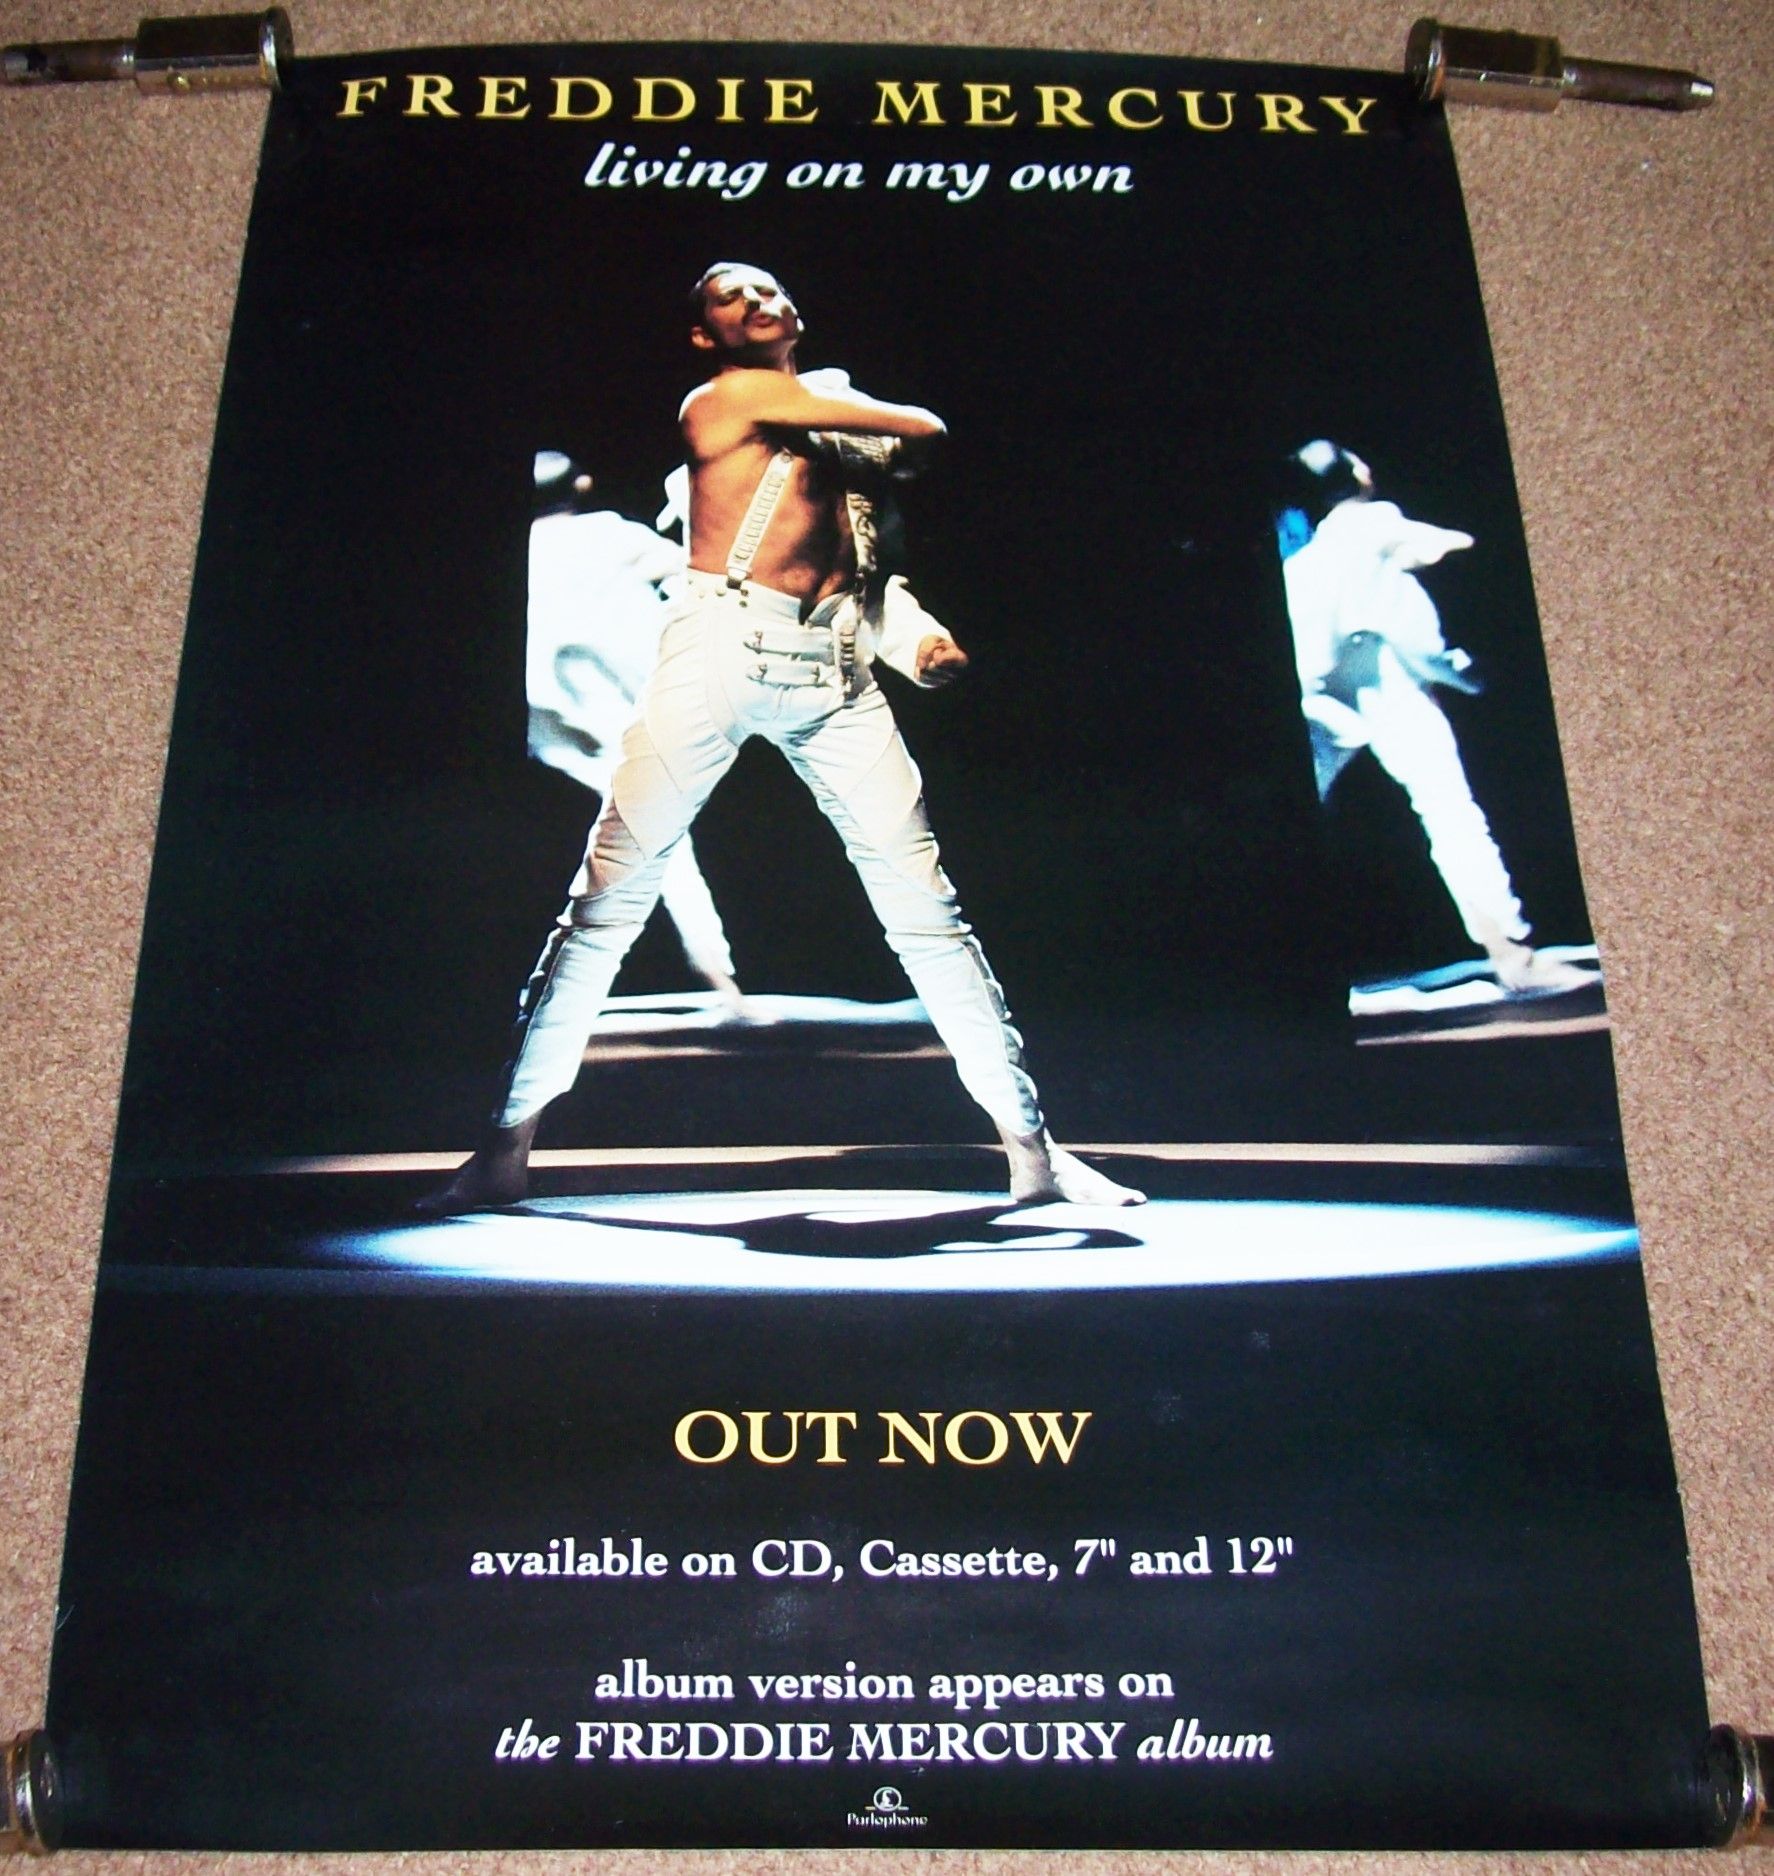 QUEEN FREDDIE MERCURY U.K. RECORD COMPANY PROMO POSTER 'LIVING ON MY OWN' S